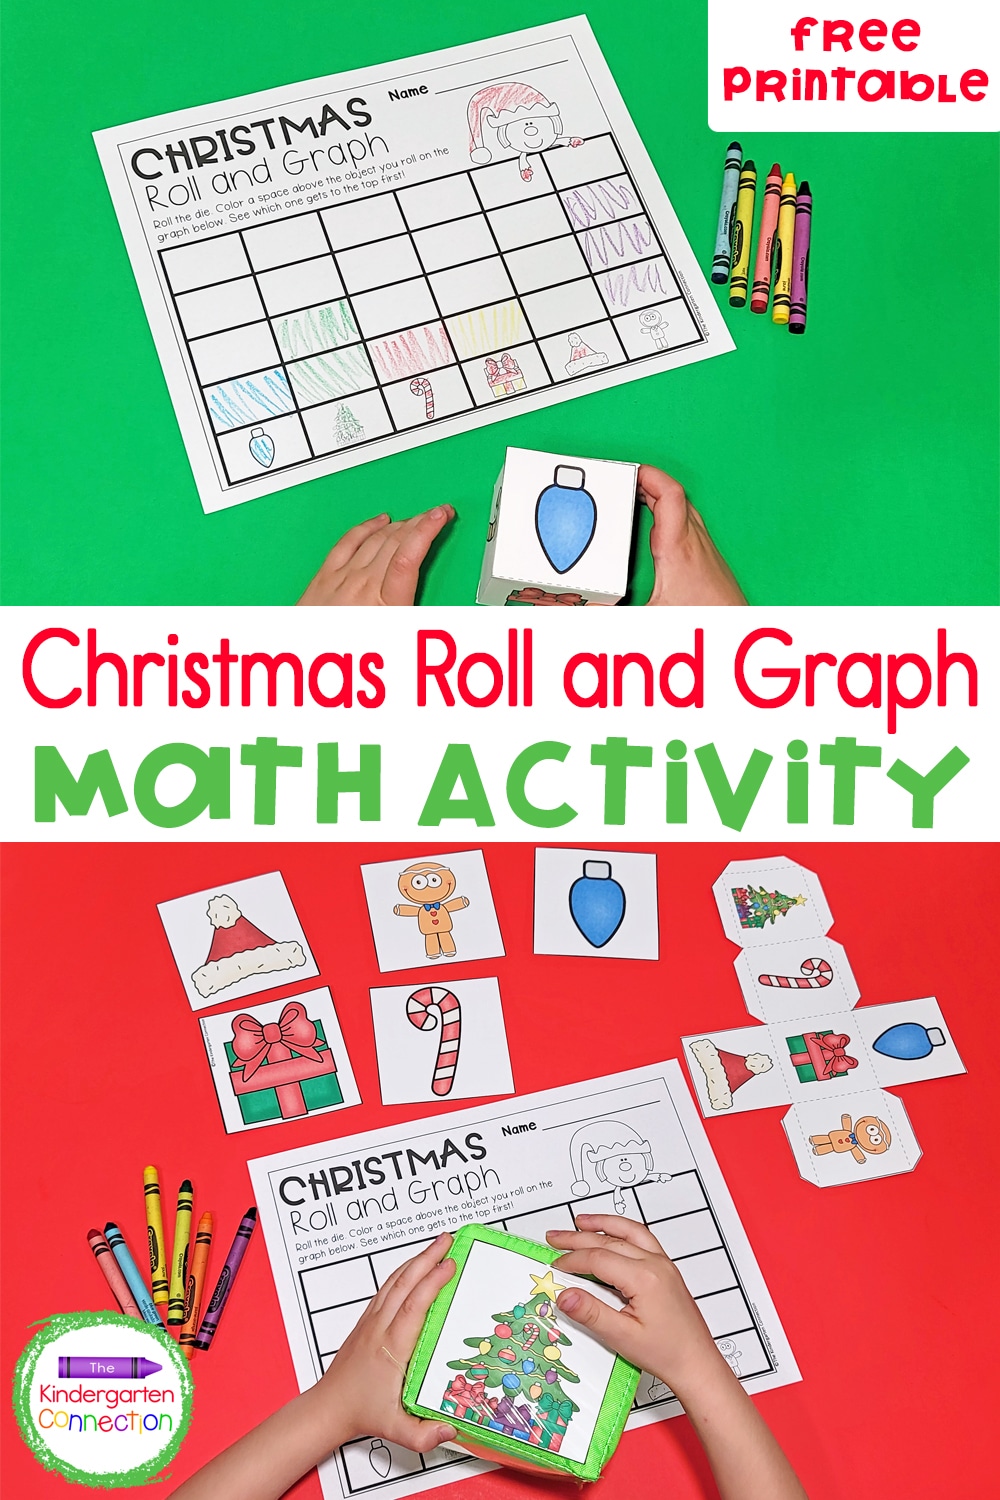 This free Roll and Graph Christmas Math Activity brings the holiday fun while also strengthening early graphing skills!